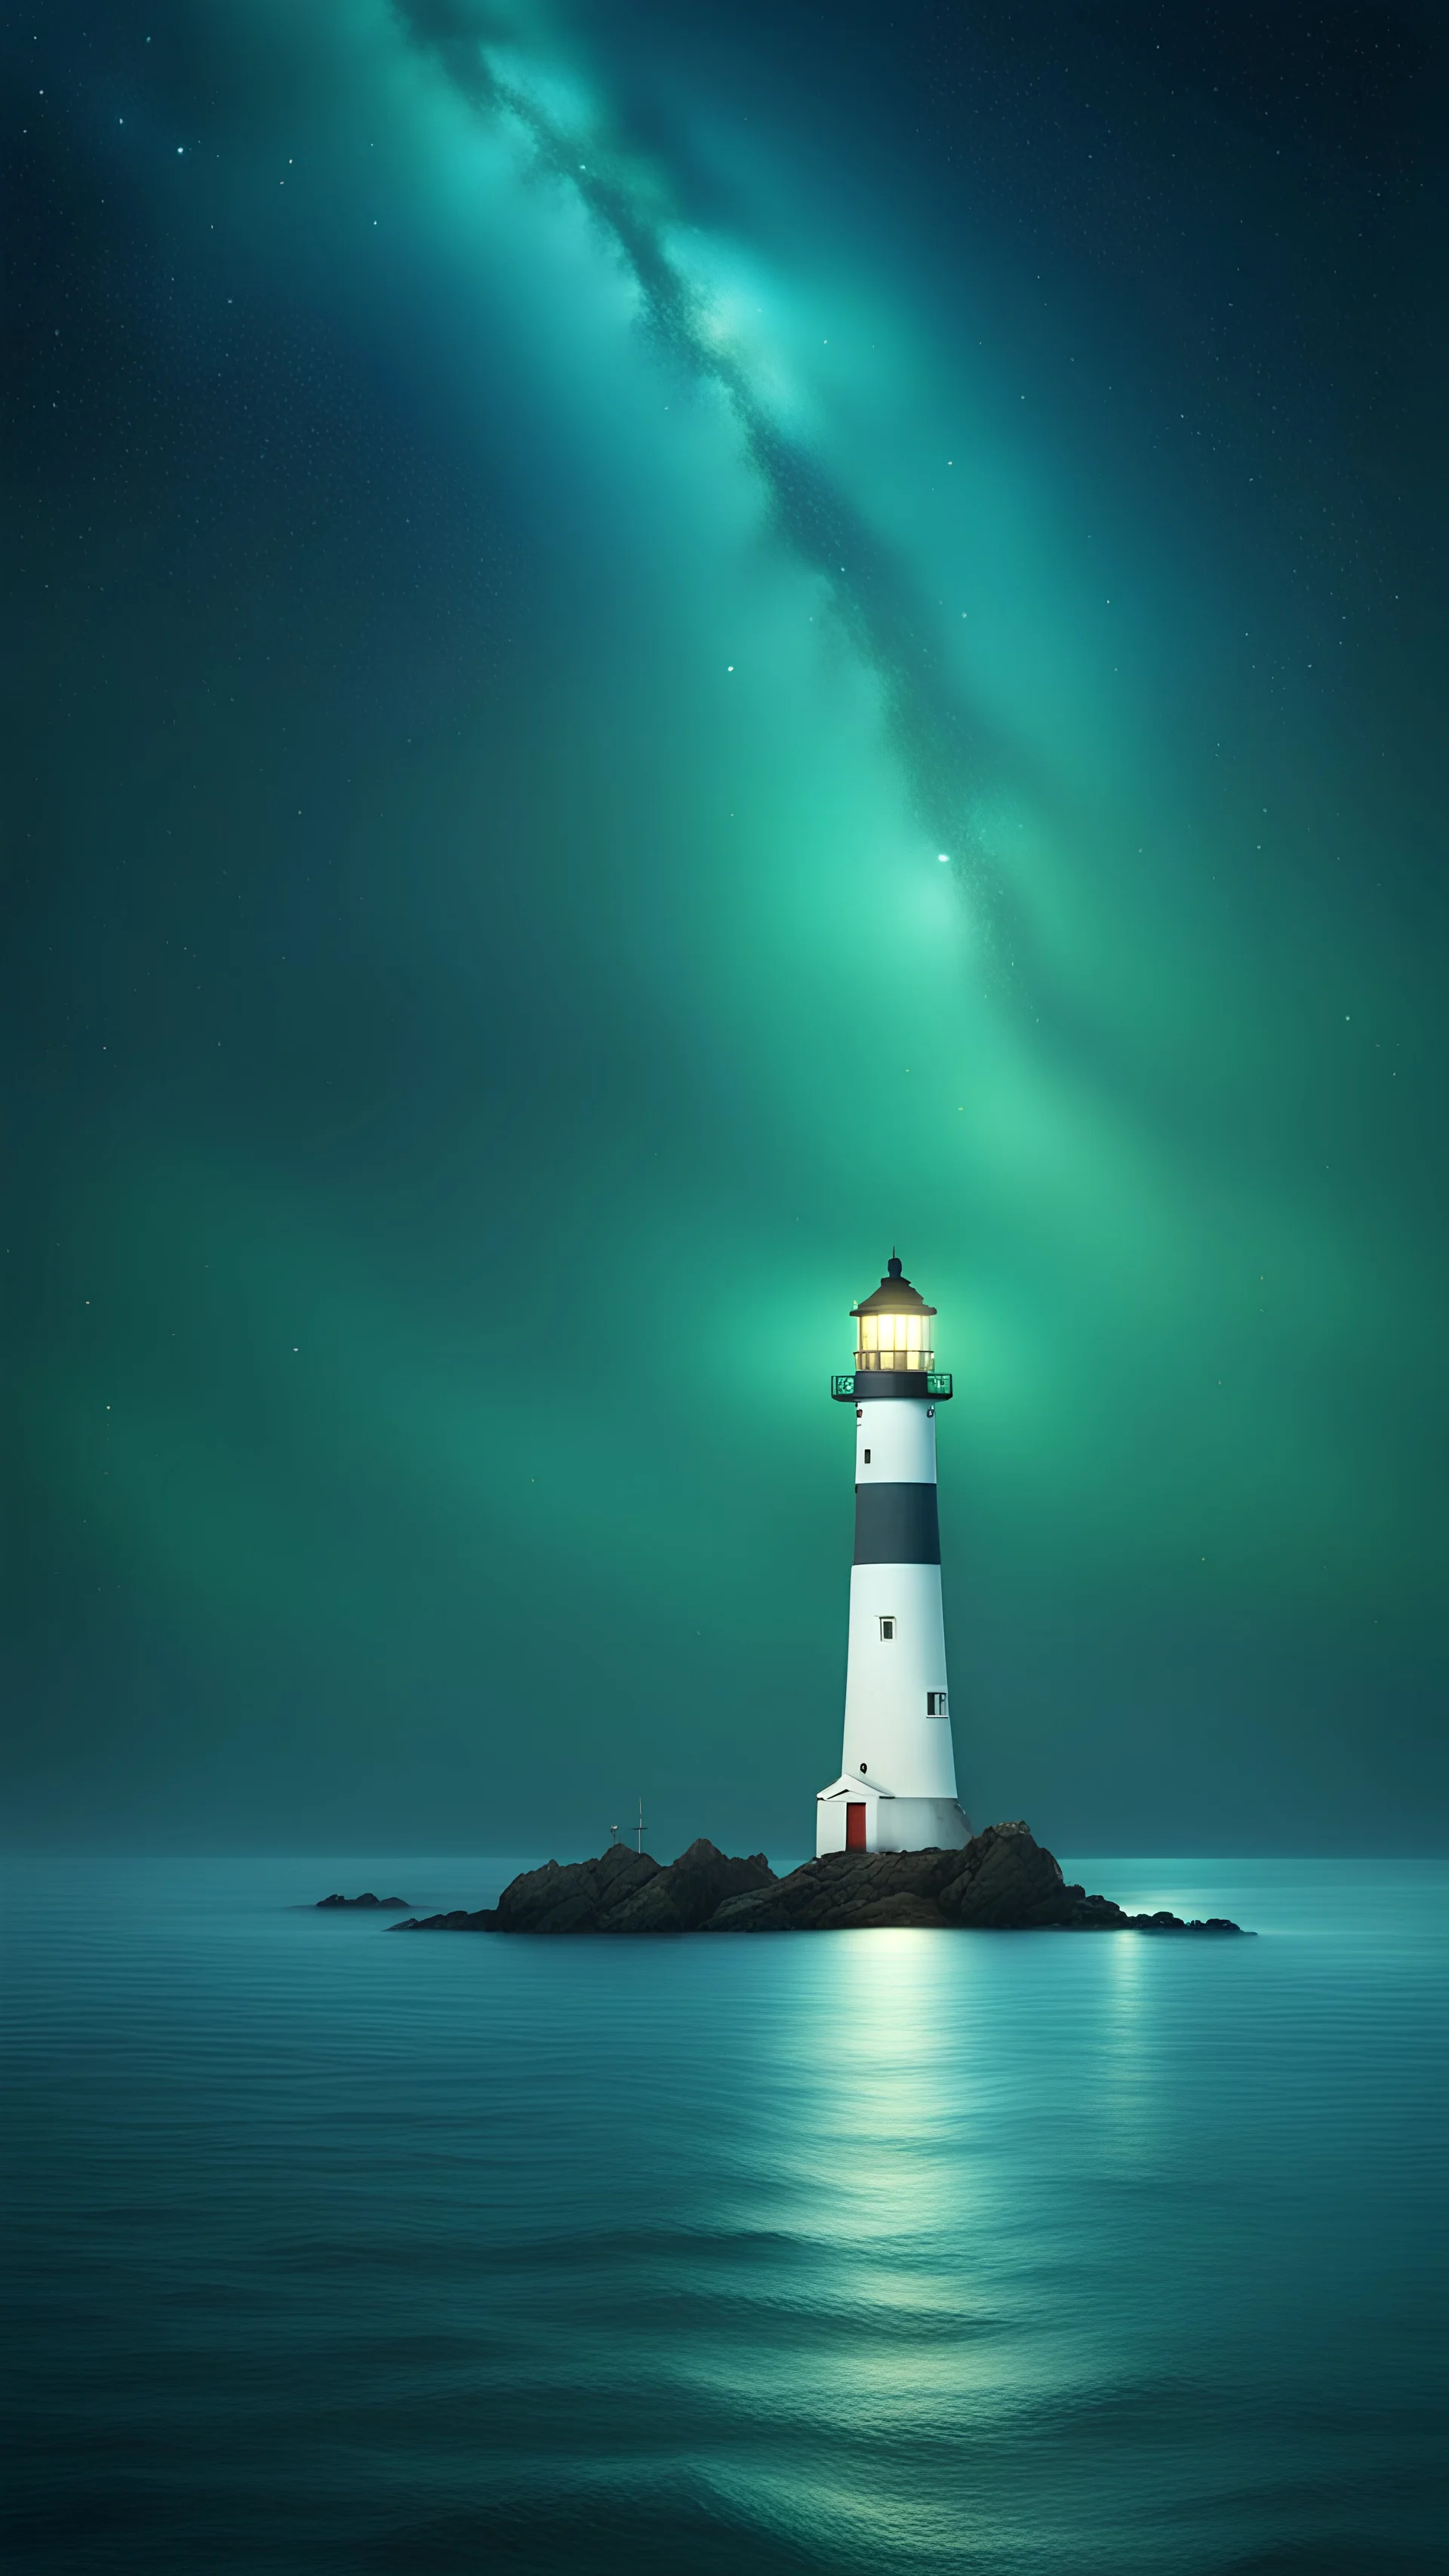 Under the blue-green starry sky, on the vast sea, there are three lighthouses located in different places.